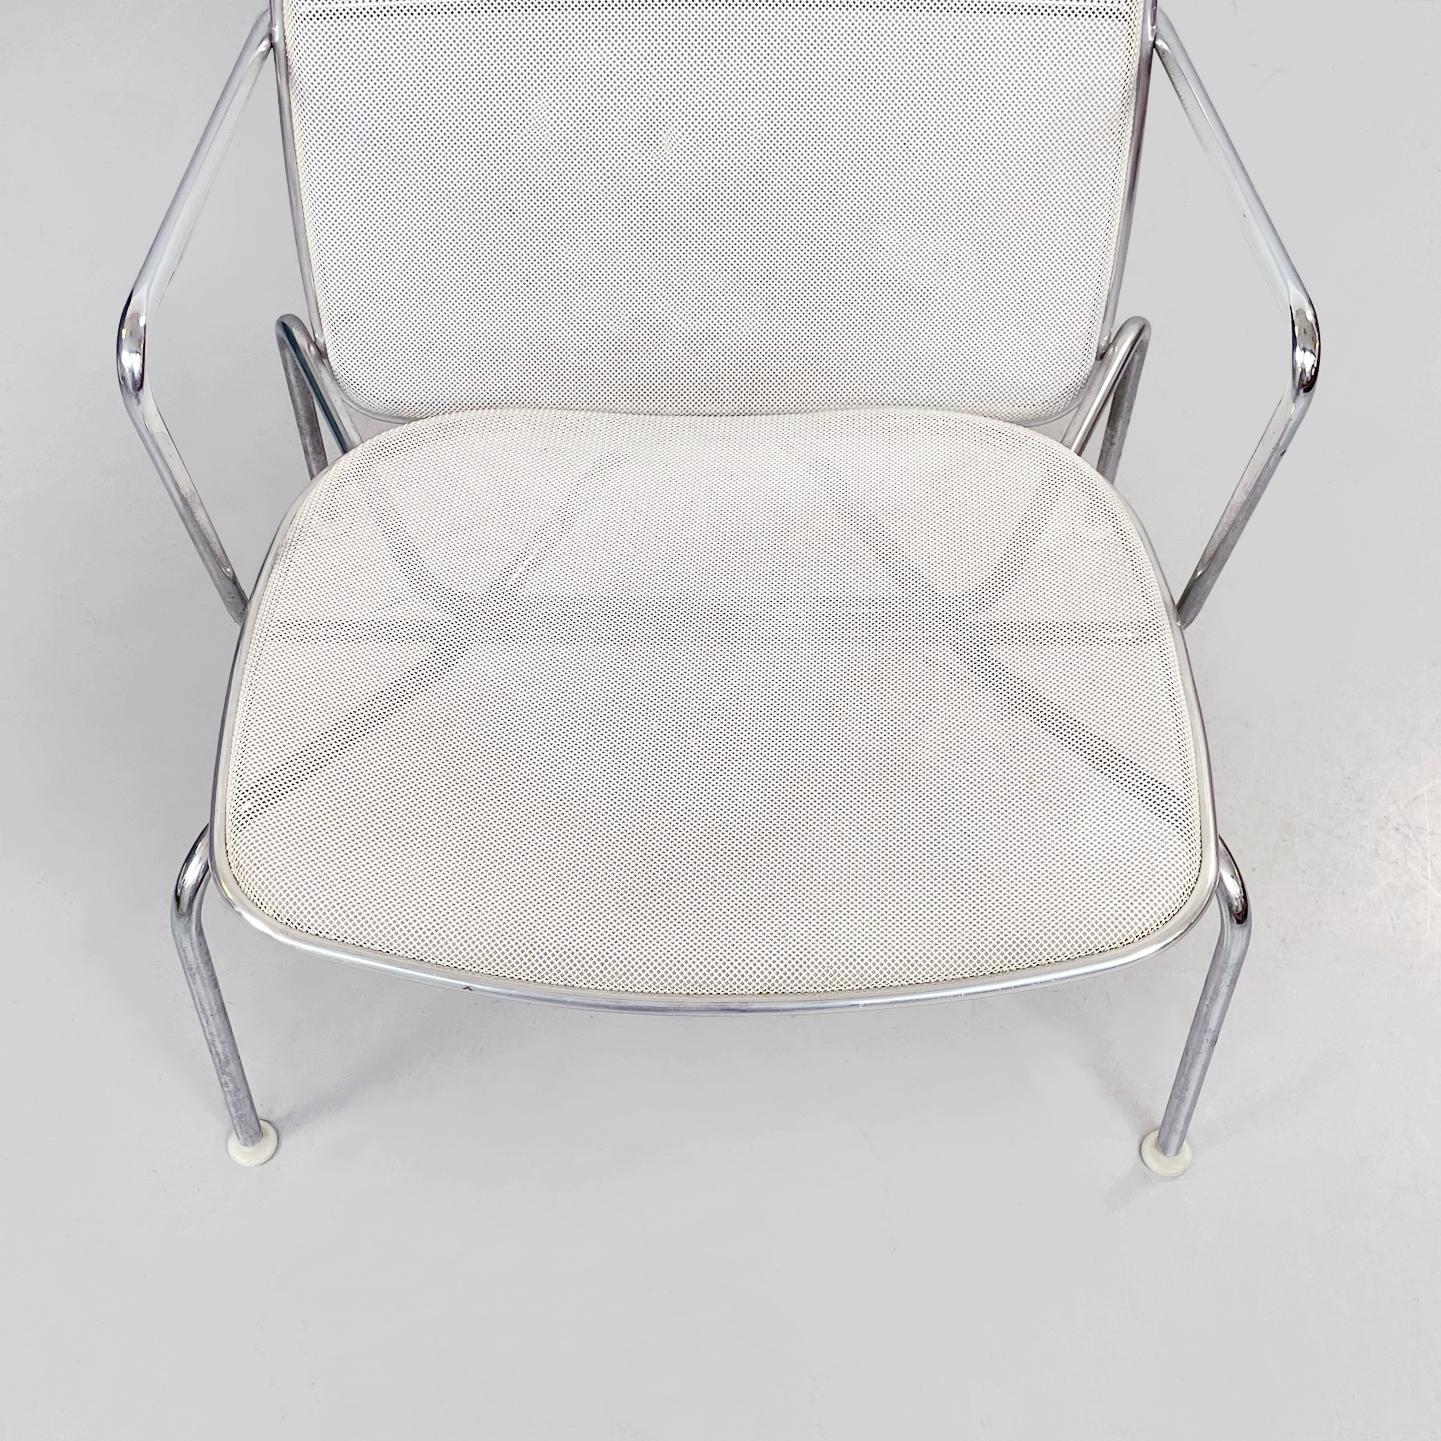 Italian 21st Century White Metal Steel Web Armchairs by Citterio for B&B, 2000s For Sale 3